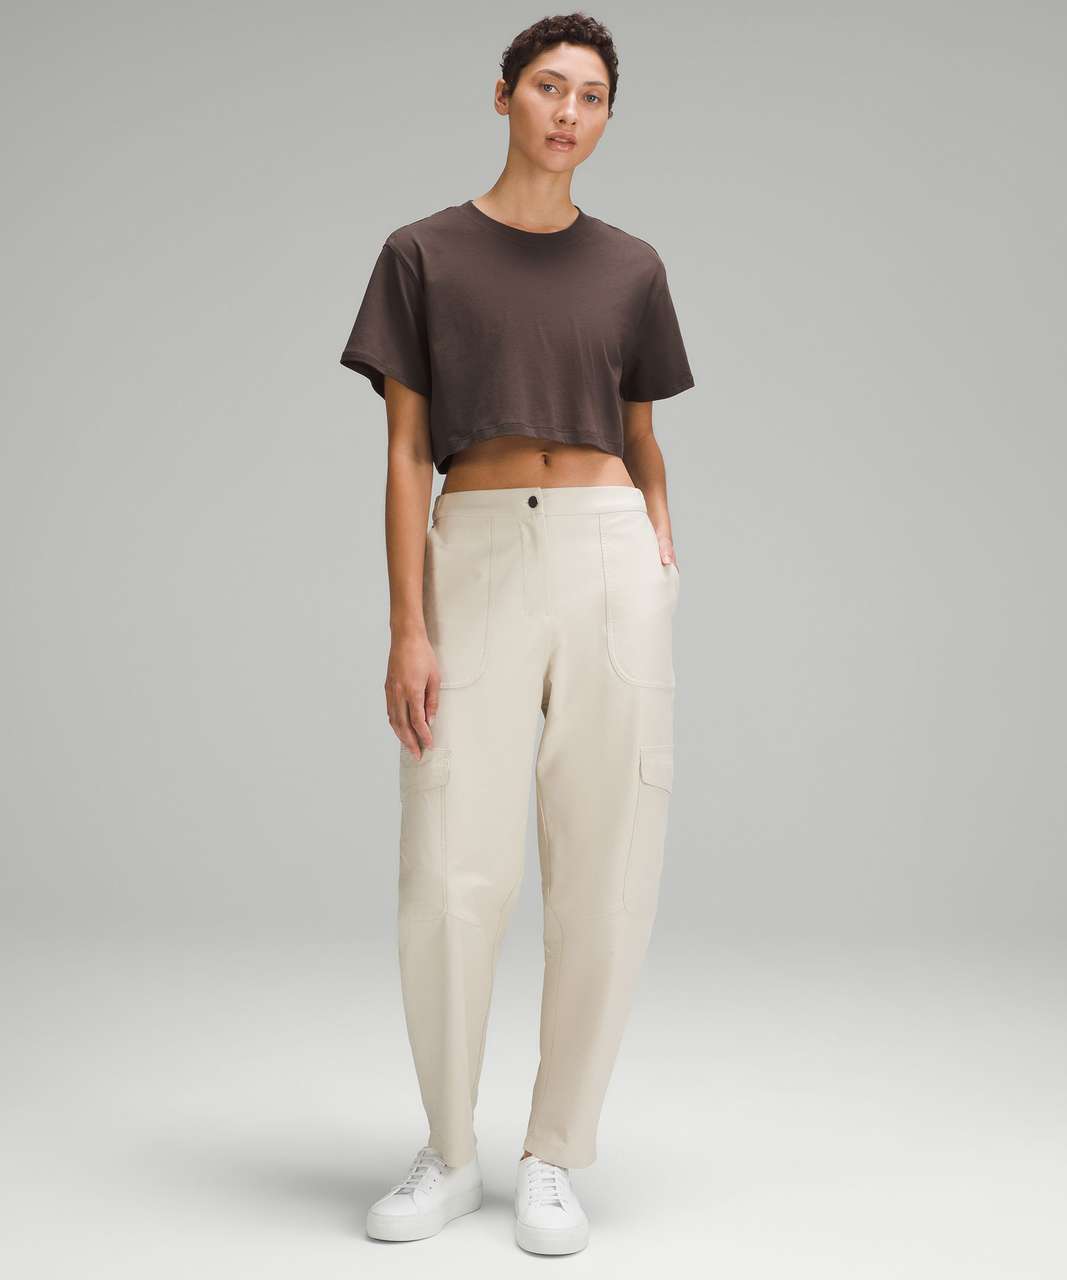 Lululemon All Yours Cropped T-Shirt - Espresso